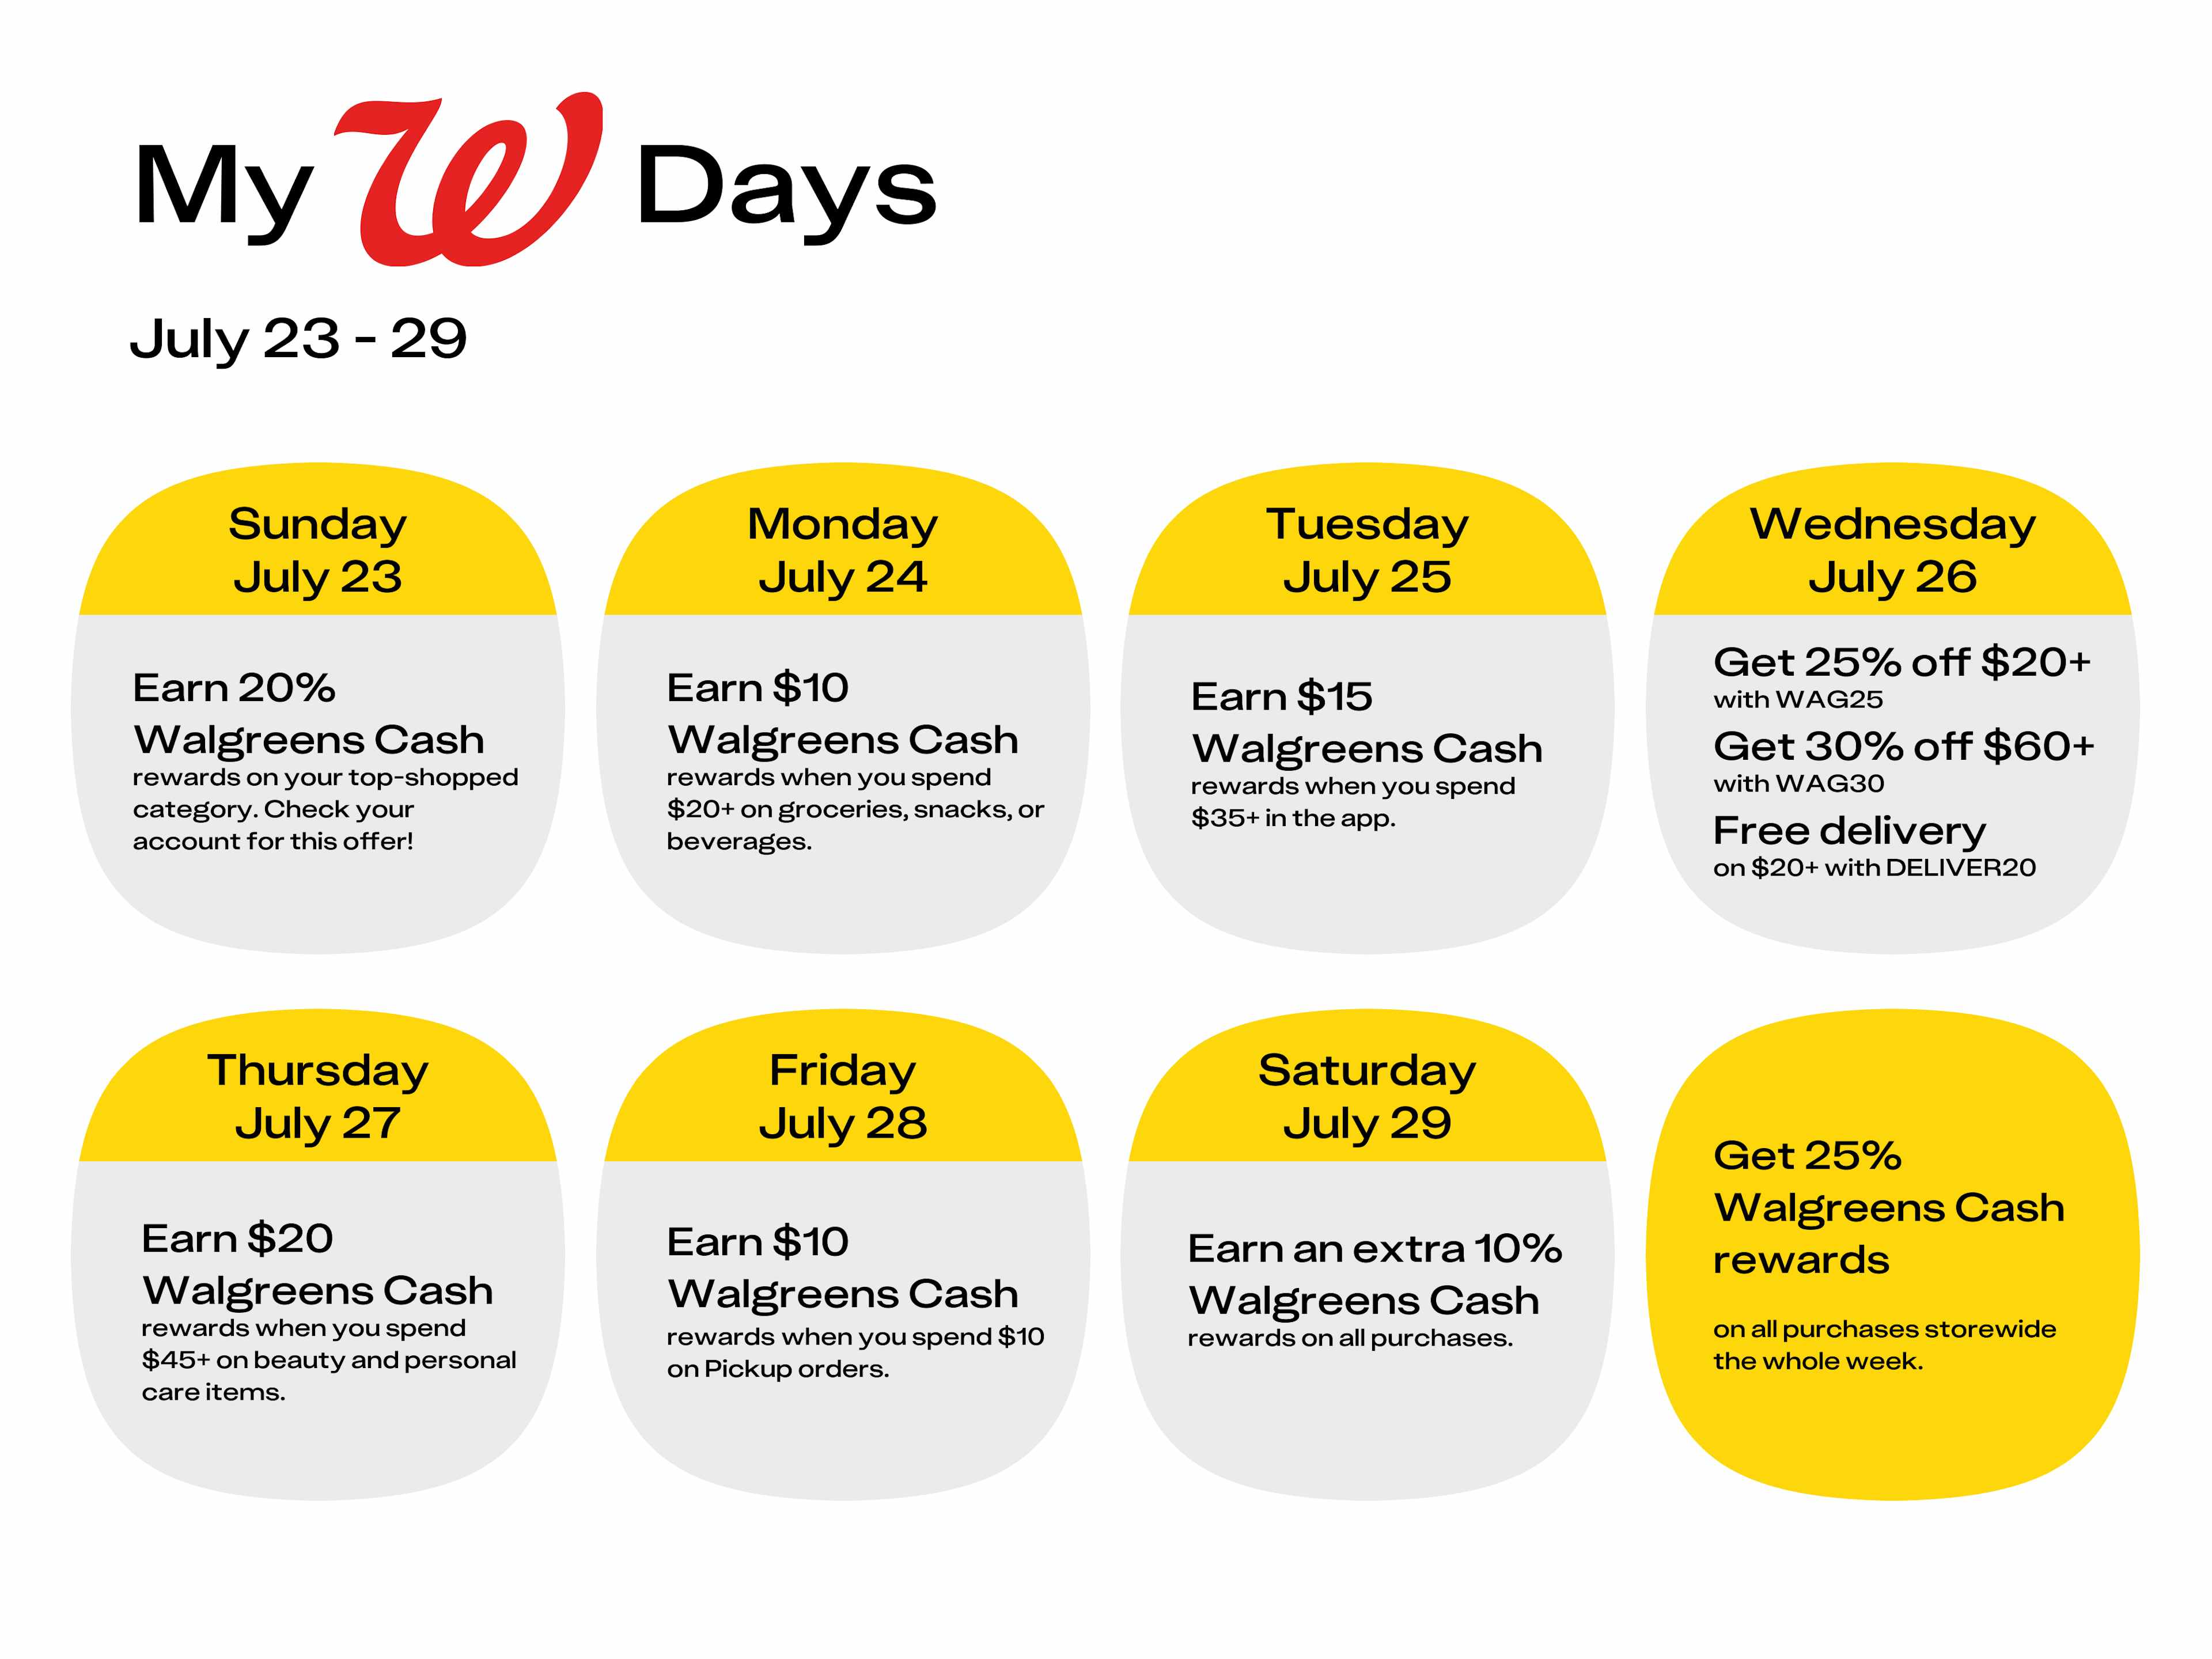 The daily Walgreens Cash rewards bonus offers during myW Days 2023.